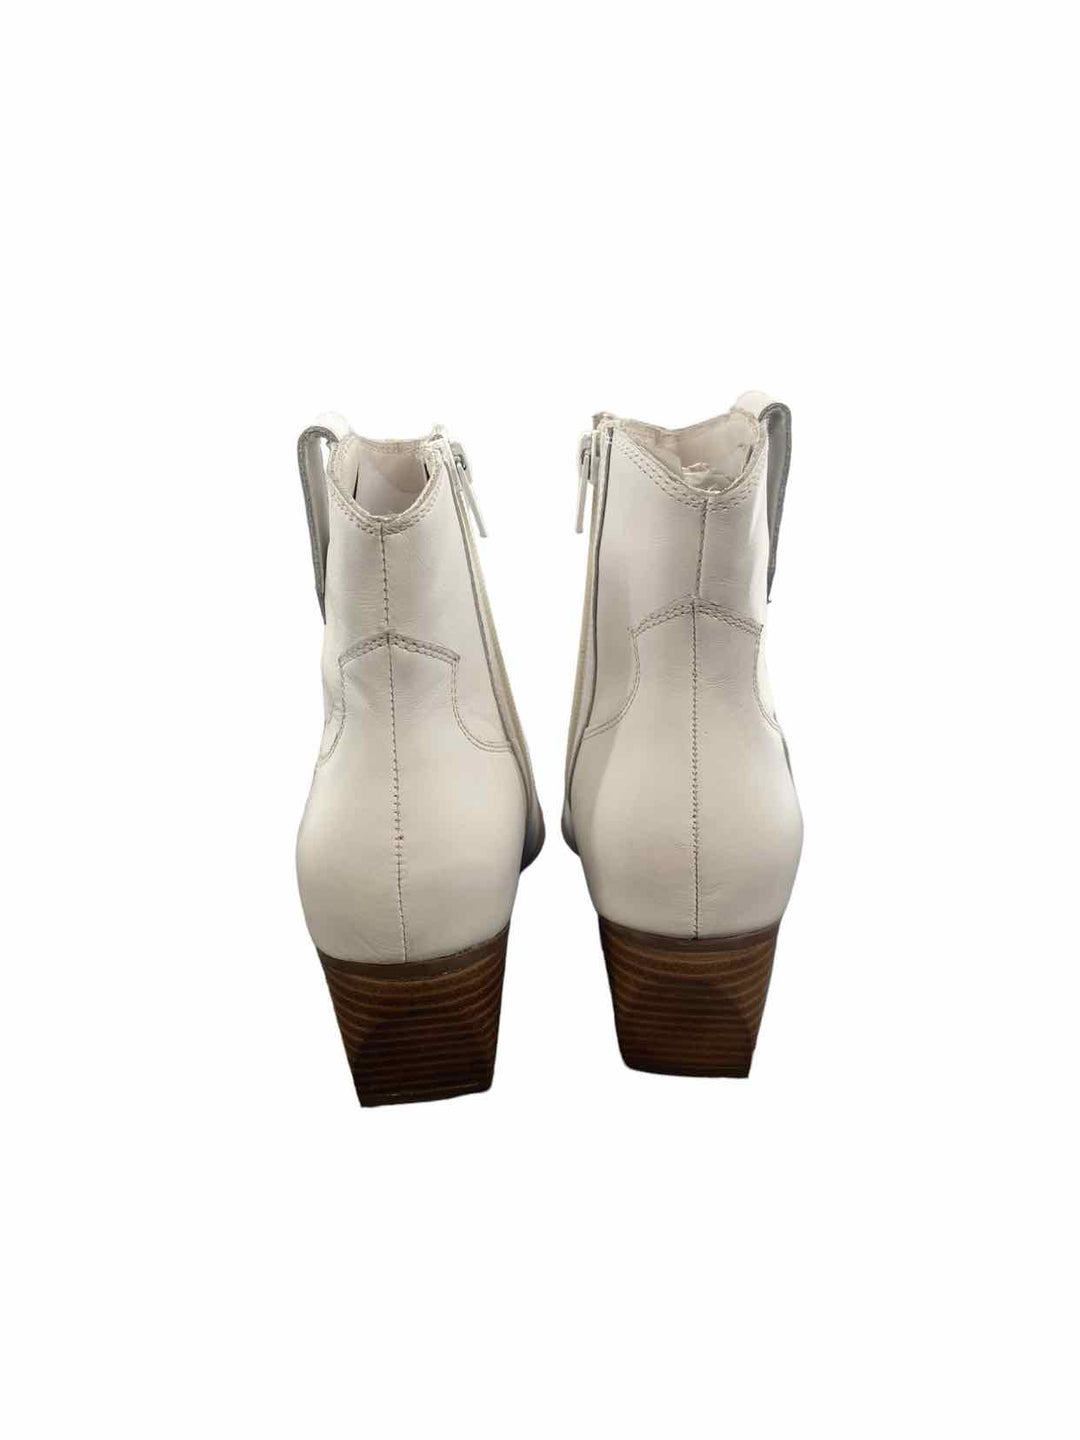 Seychelles Shoe Size 6 White Leather Boots(Ankle)